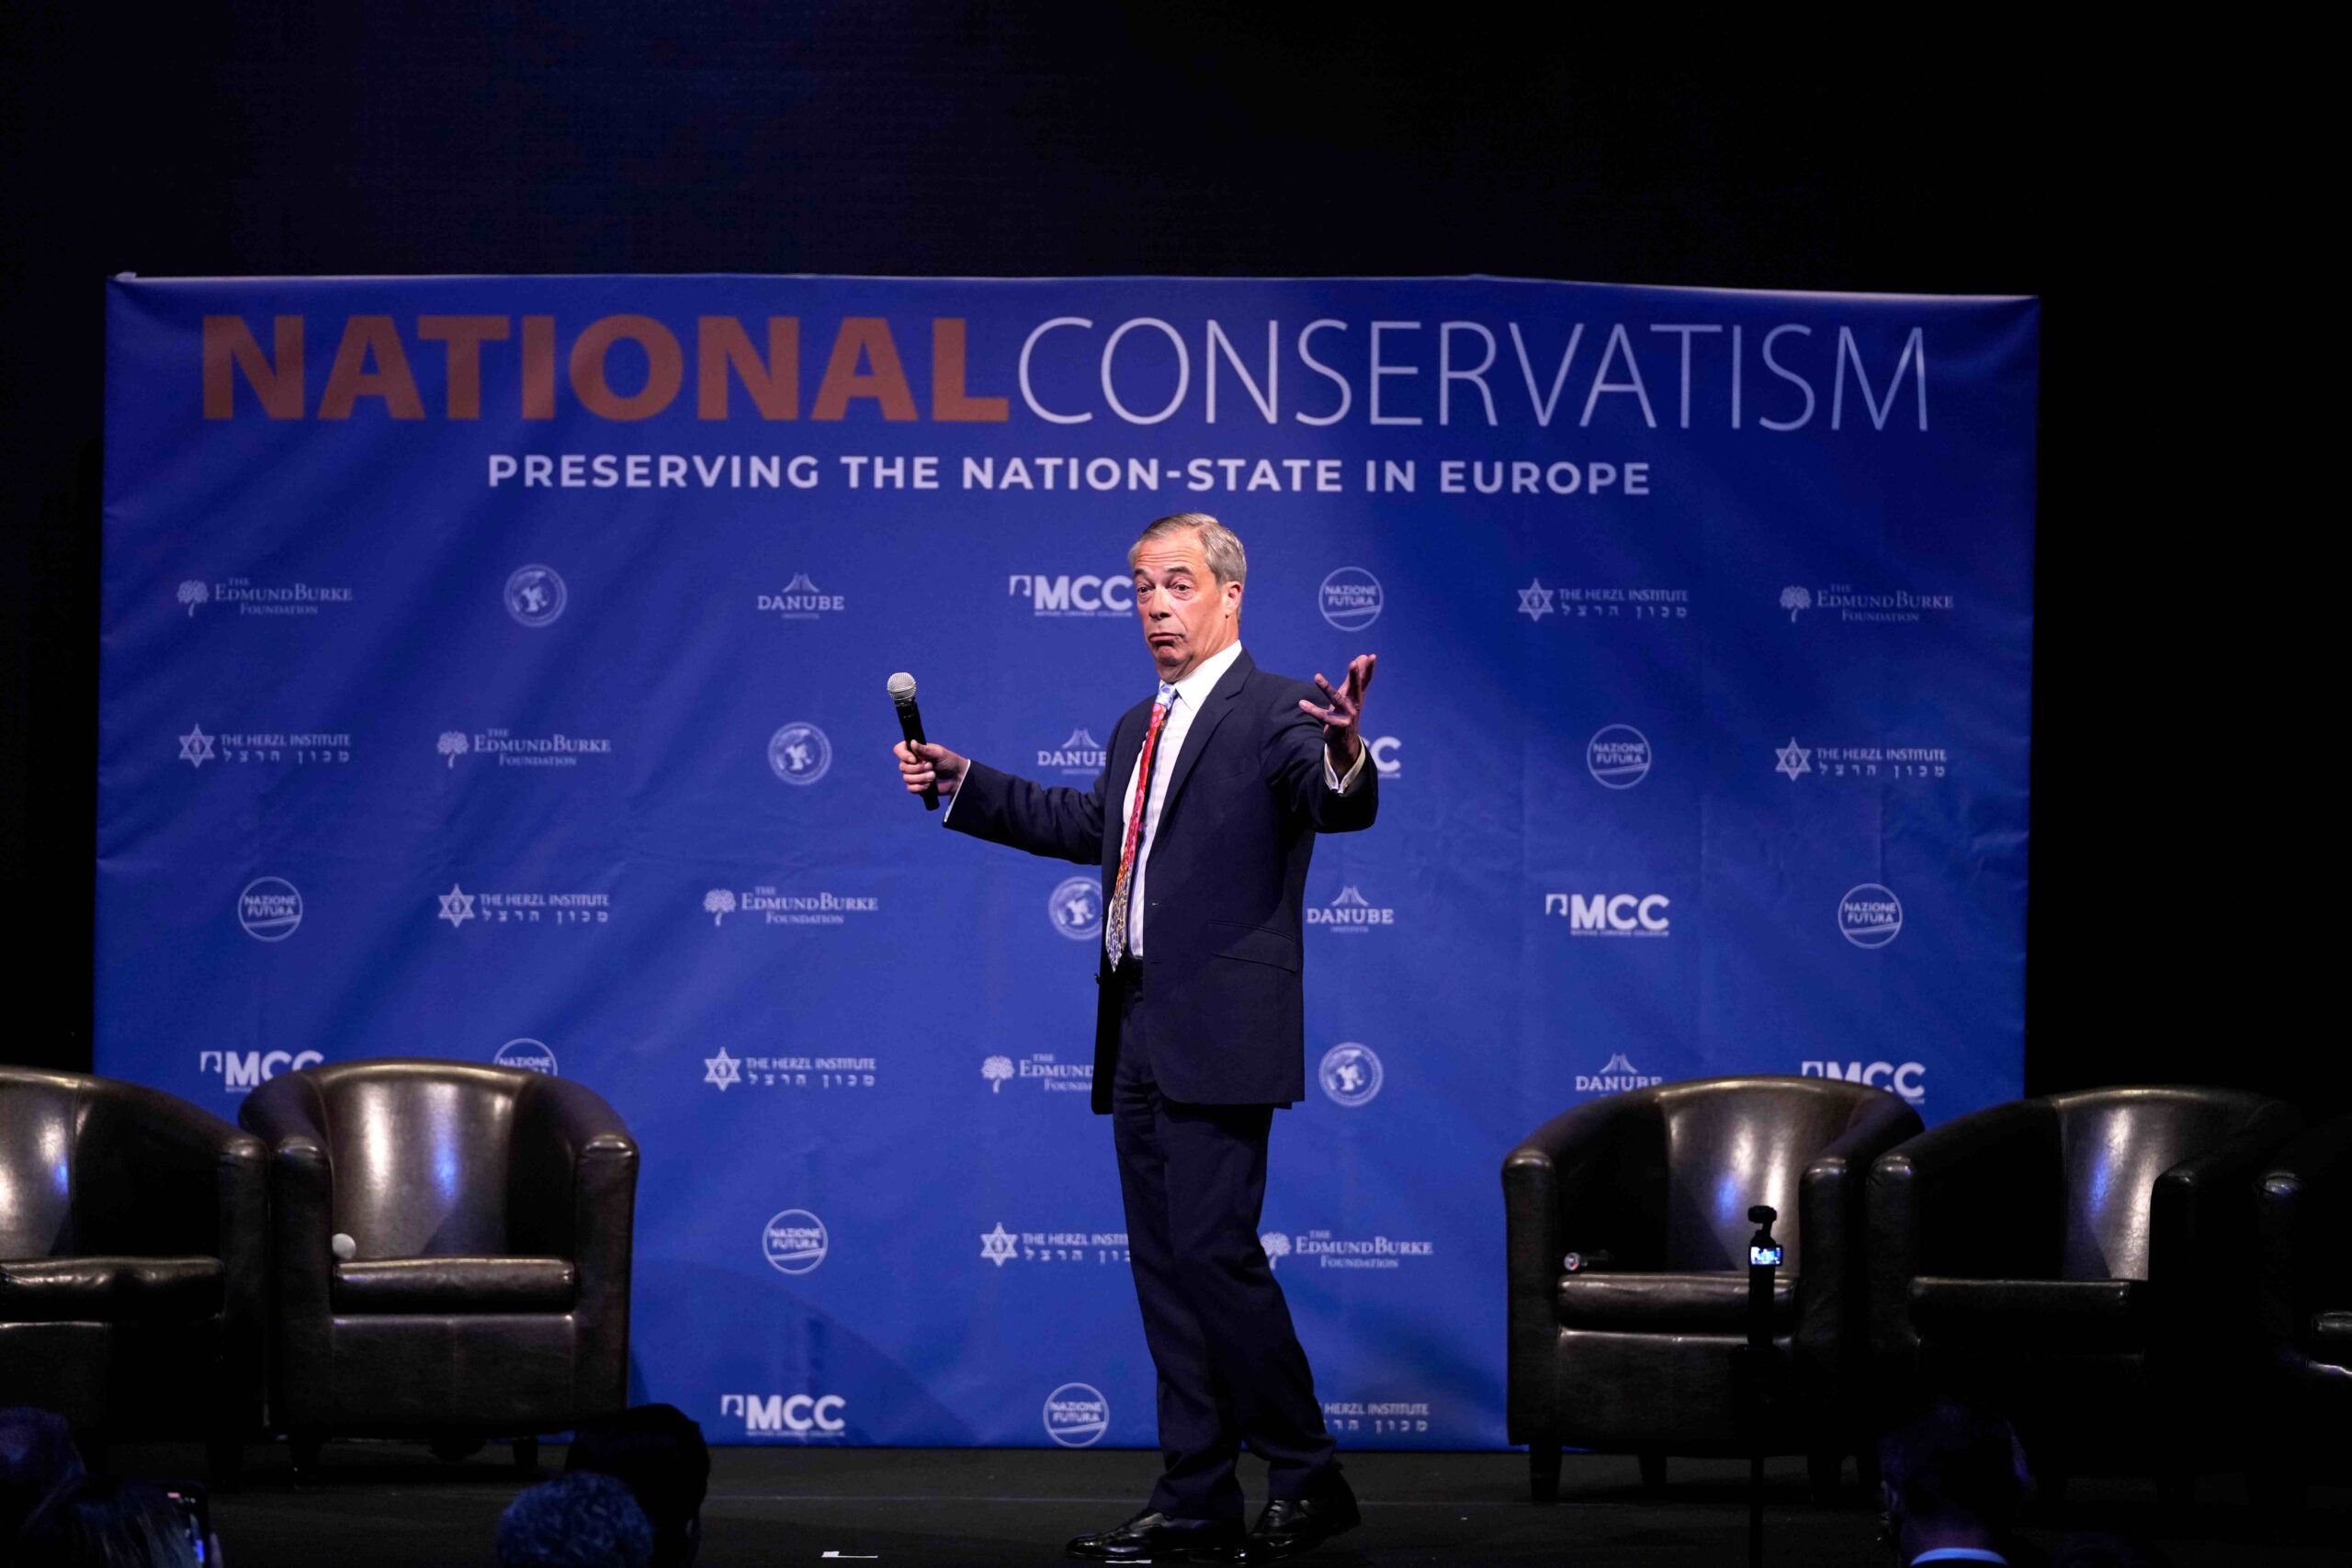 Police in Brussels attempted to shut down the two-day NatCon conference after the district mayor cited “public safety concerns” over the “far-right” gathering. (AP Photo/Virginia Mayo)